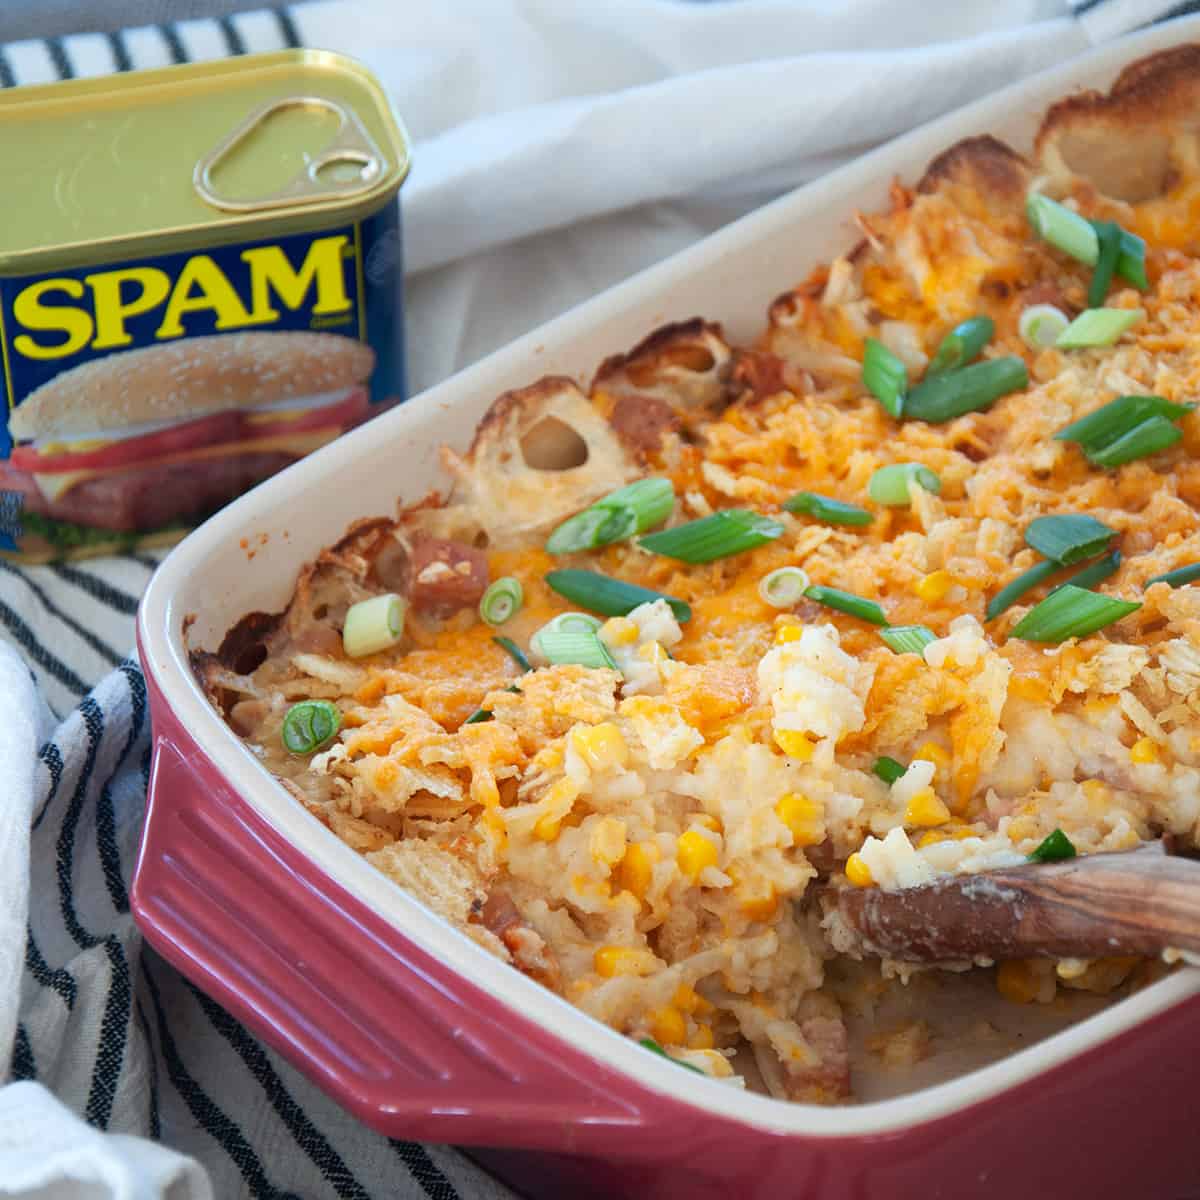 A wooden spoon digging into the casserole dish of finished spam casserole.